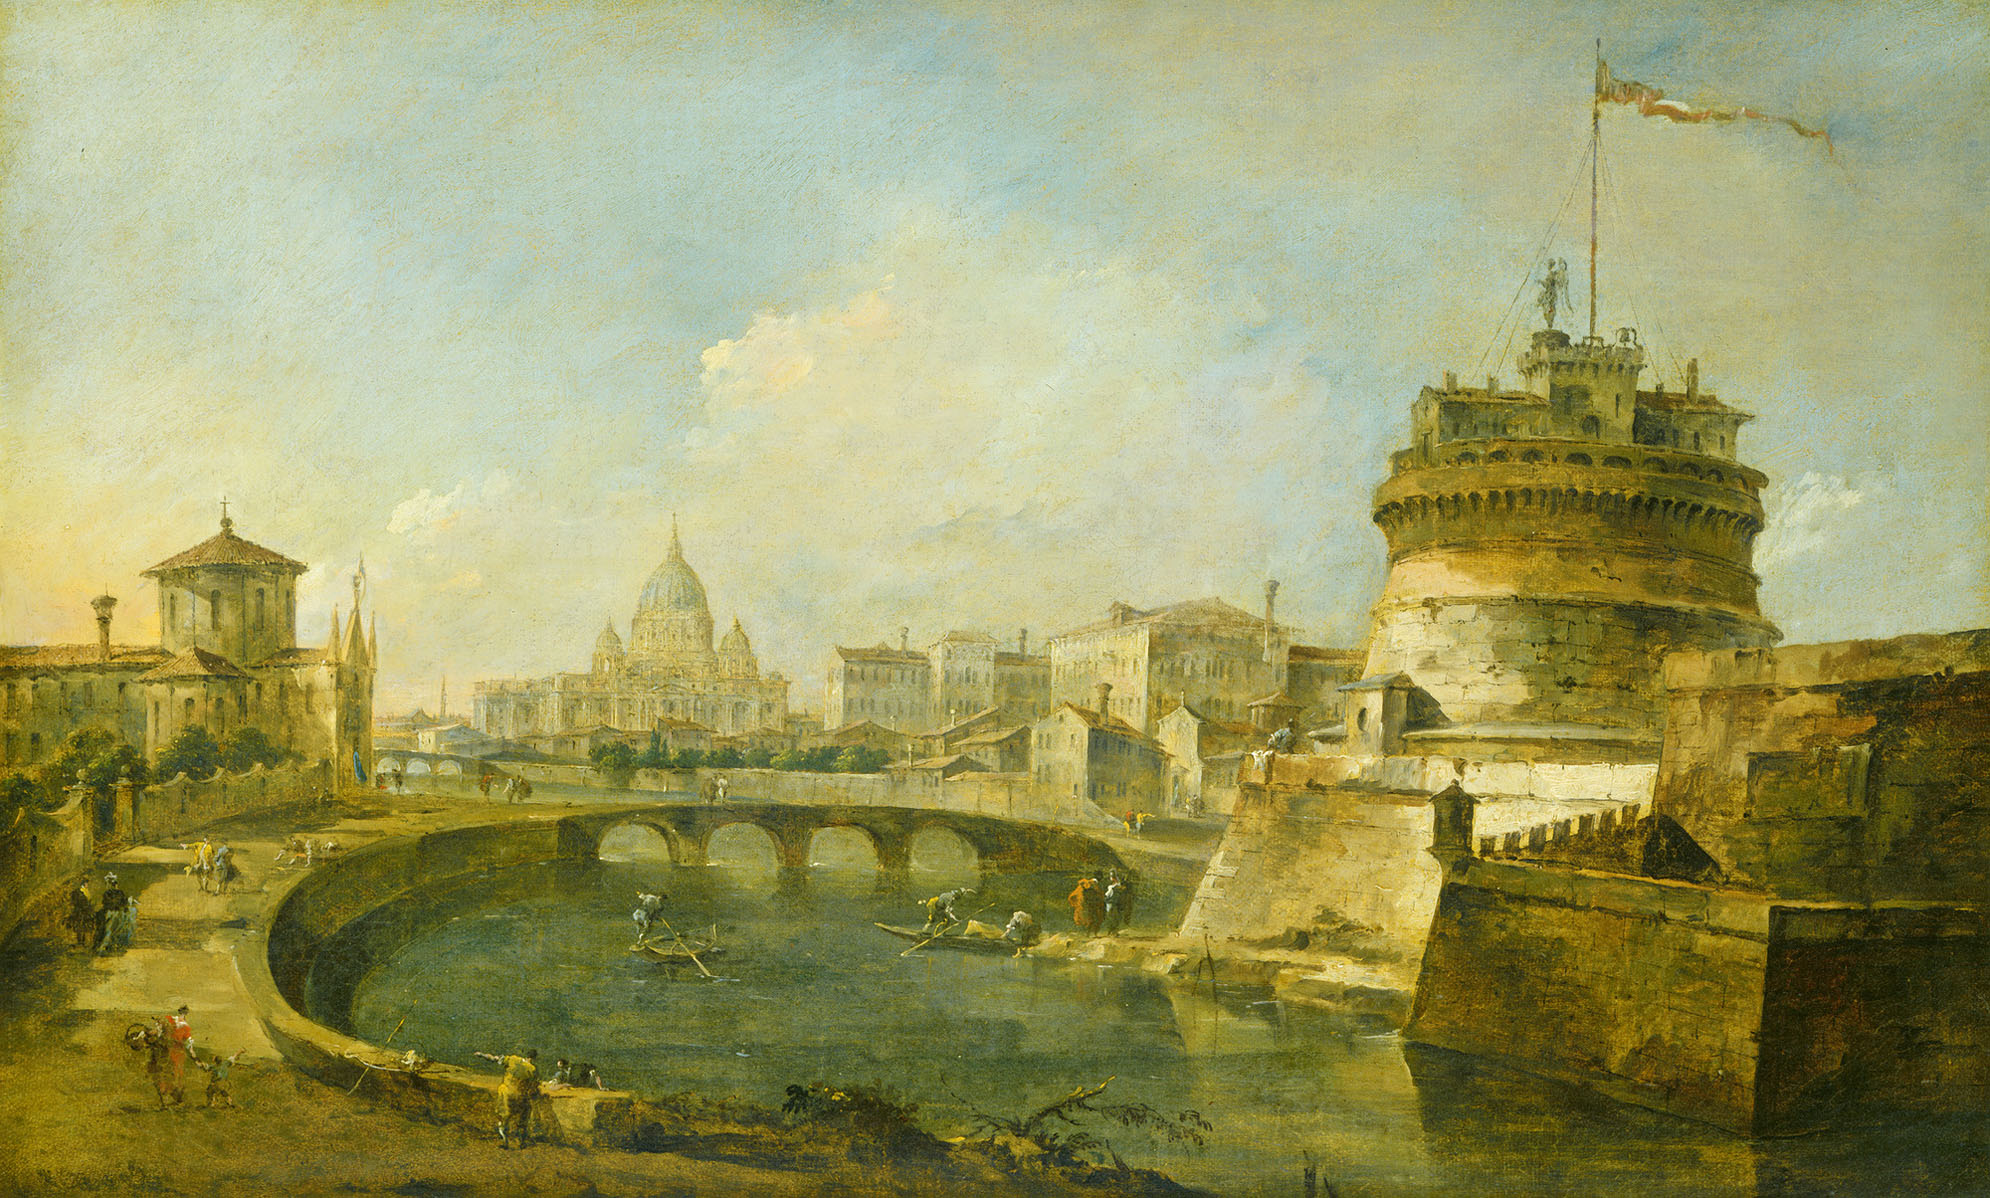 Francesco Guardi (Italian, 1712 - 1793 ), Fanciful View of the Castel Sant'Angelo, Rome, c. 1785, oil on canvas, Gift of Howard Sturges